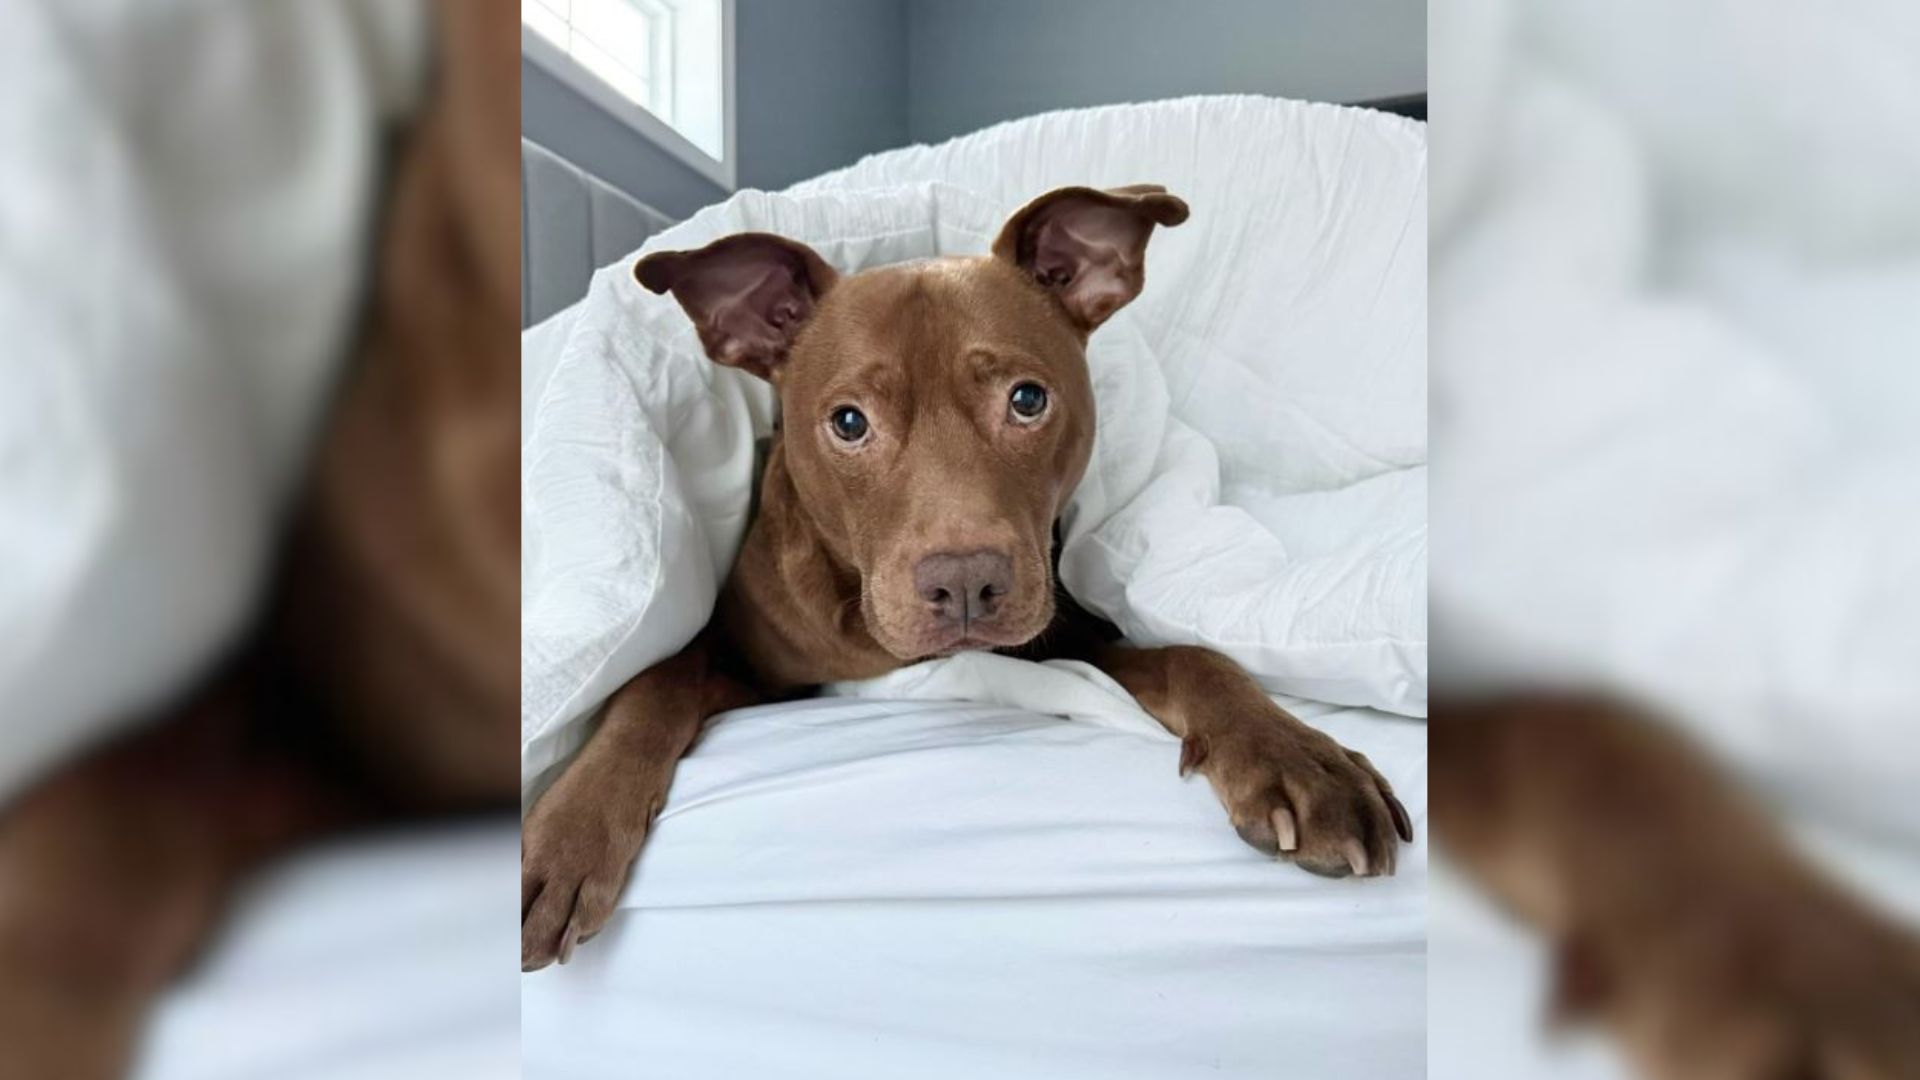 Tatum, The Rescue Pittie Saved At The Last Moment, Is Now A Petfluencer Speaking Up For The Underdog